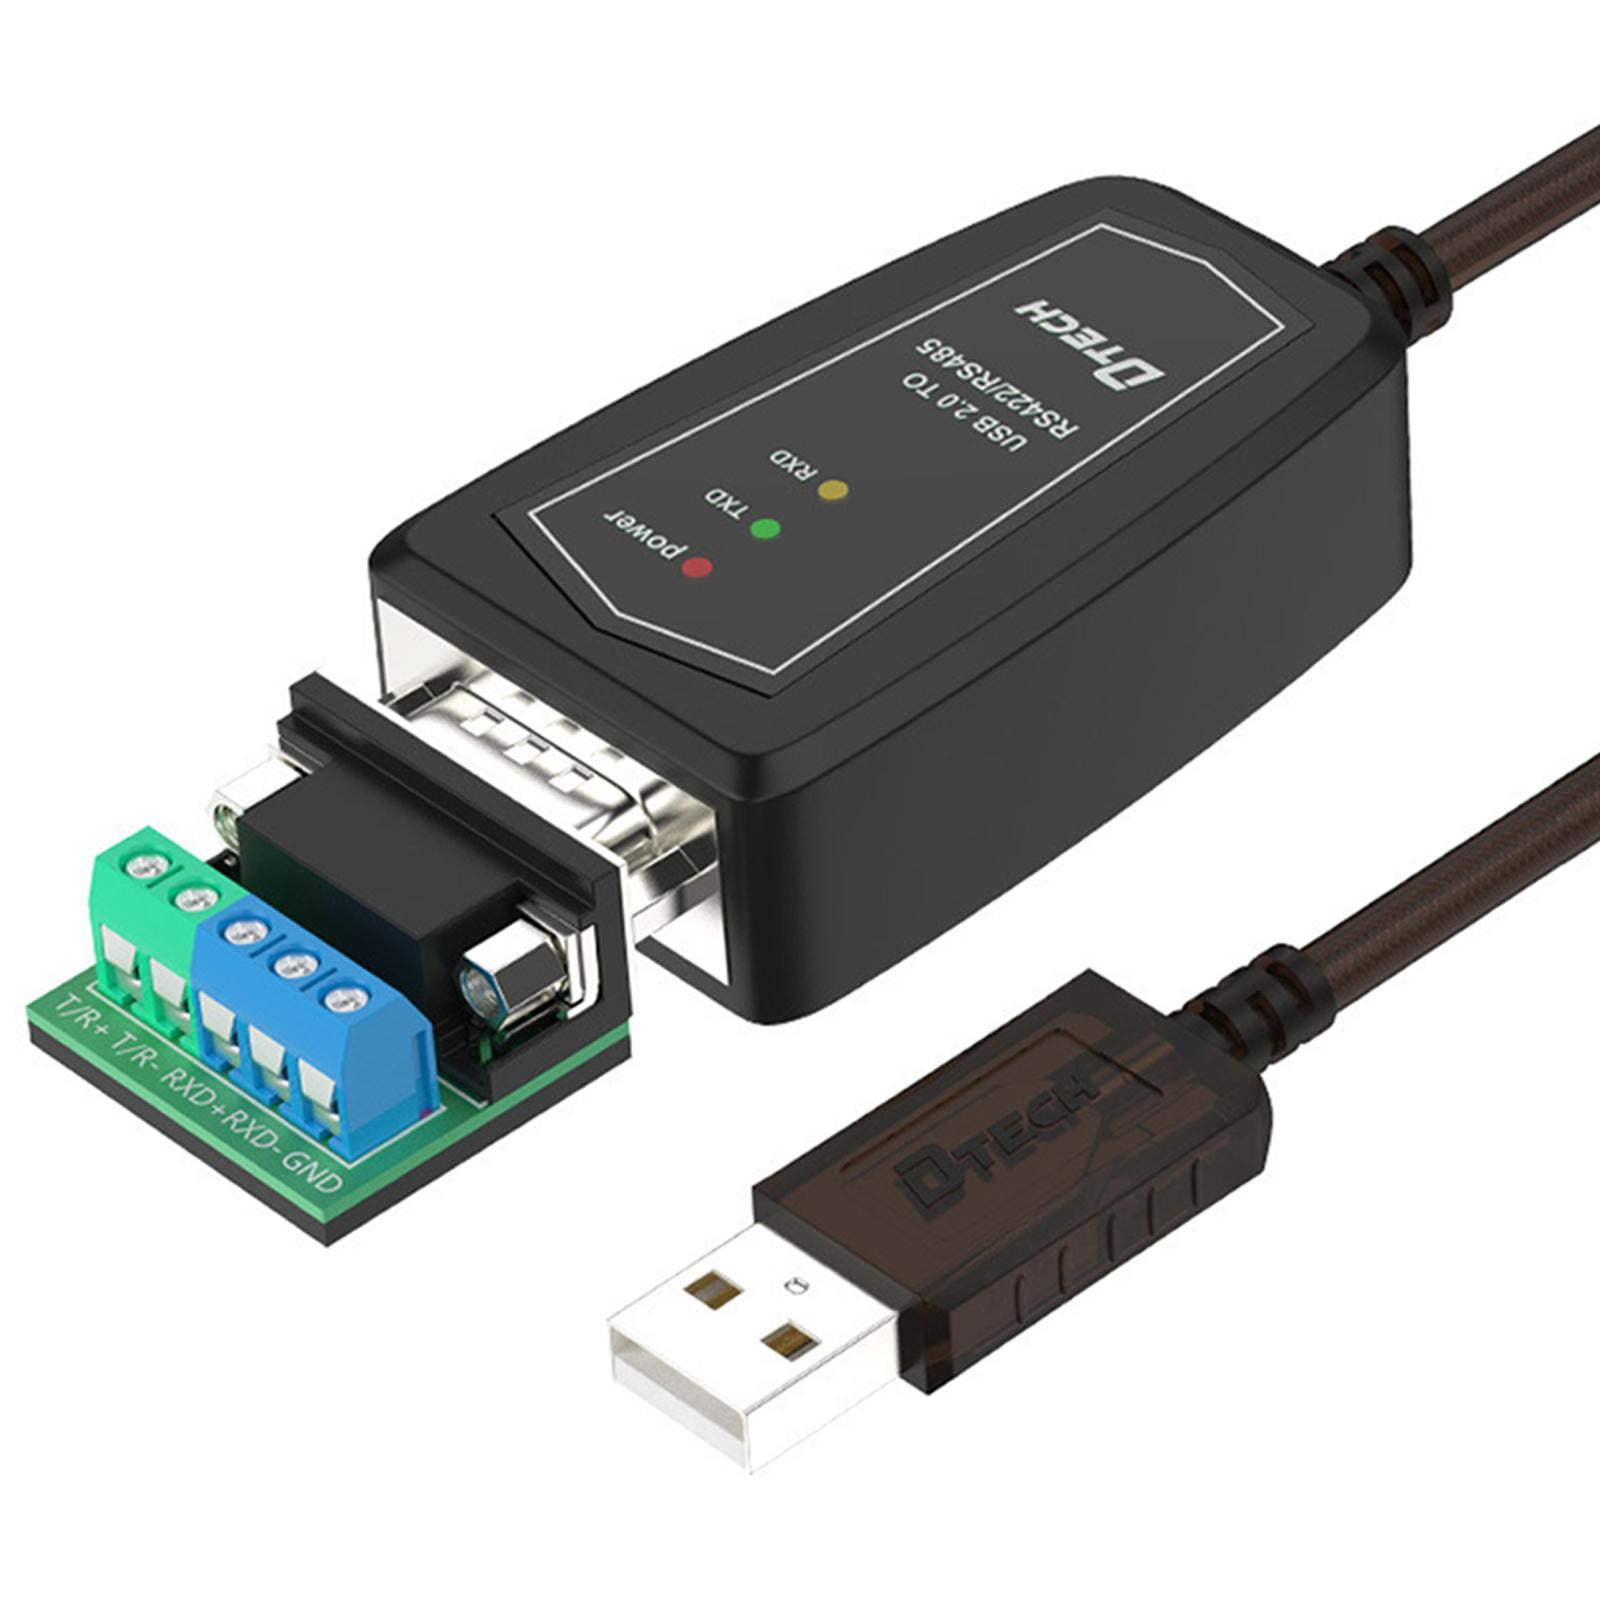 USB to 422 Adapter Cable Automatic Control Interference Cable Length 0.5m - Walmart.com